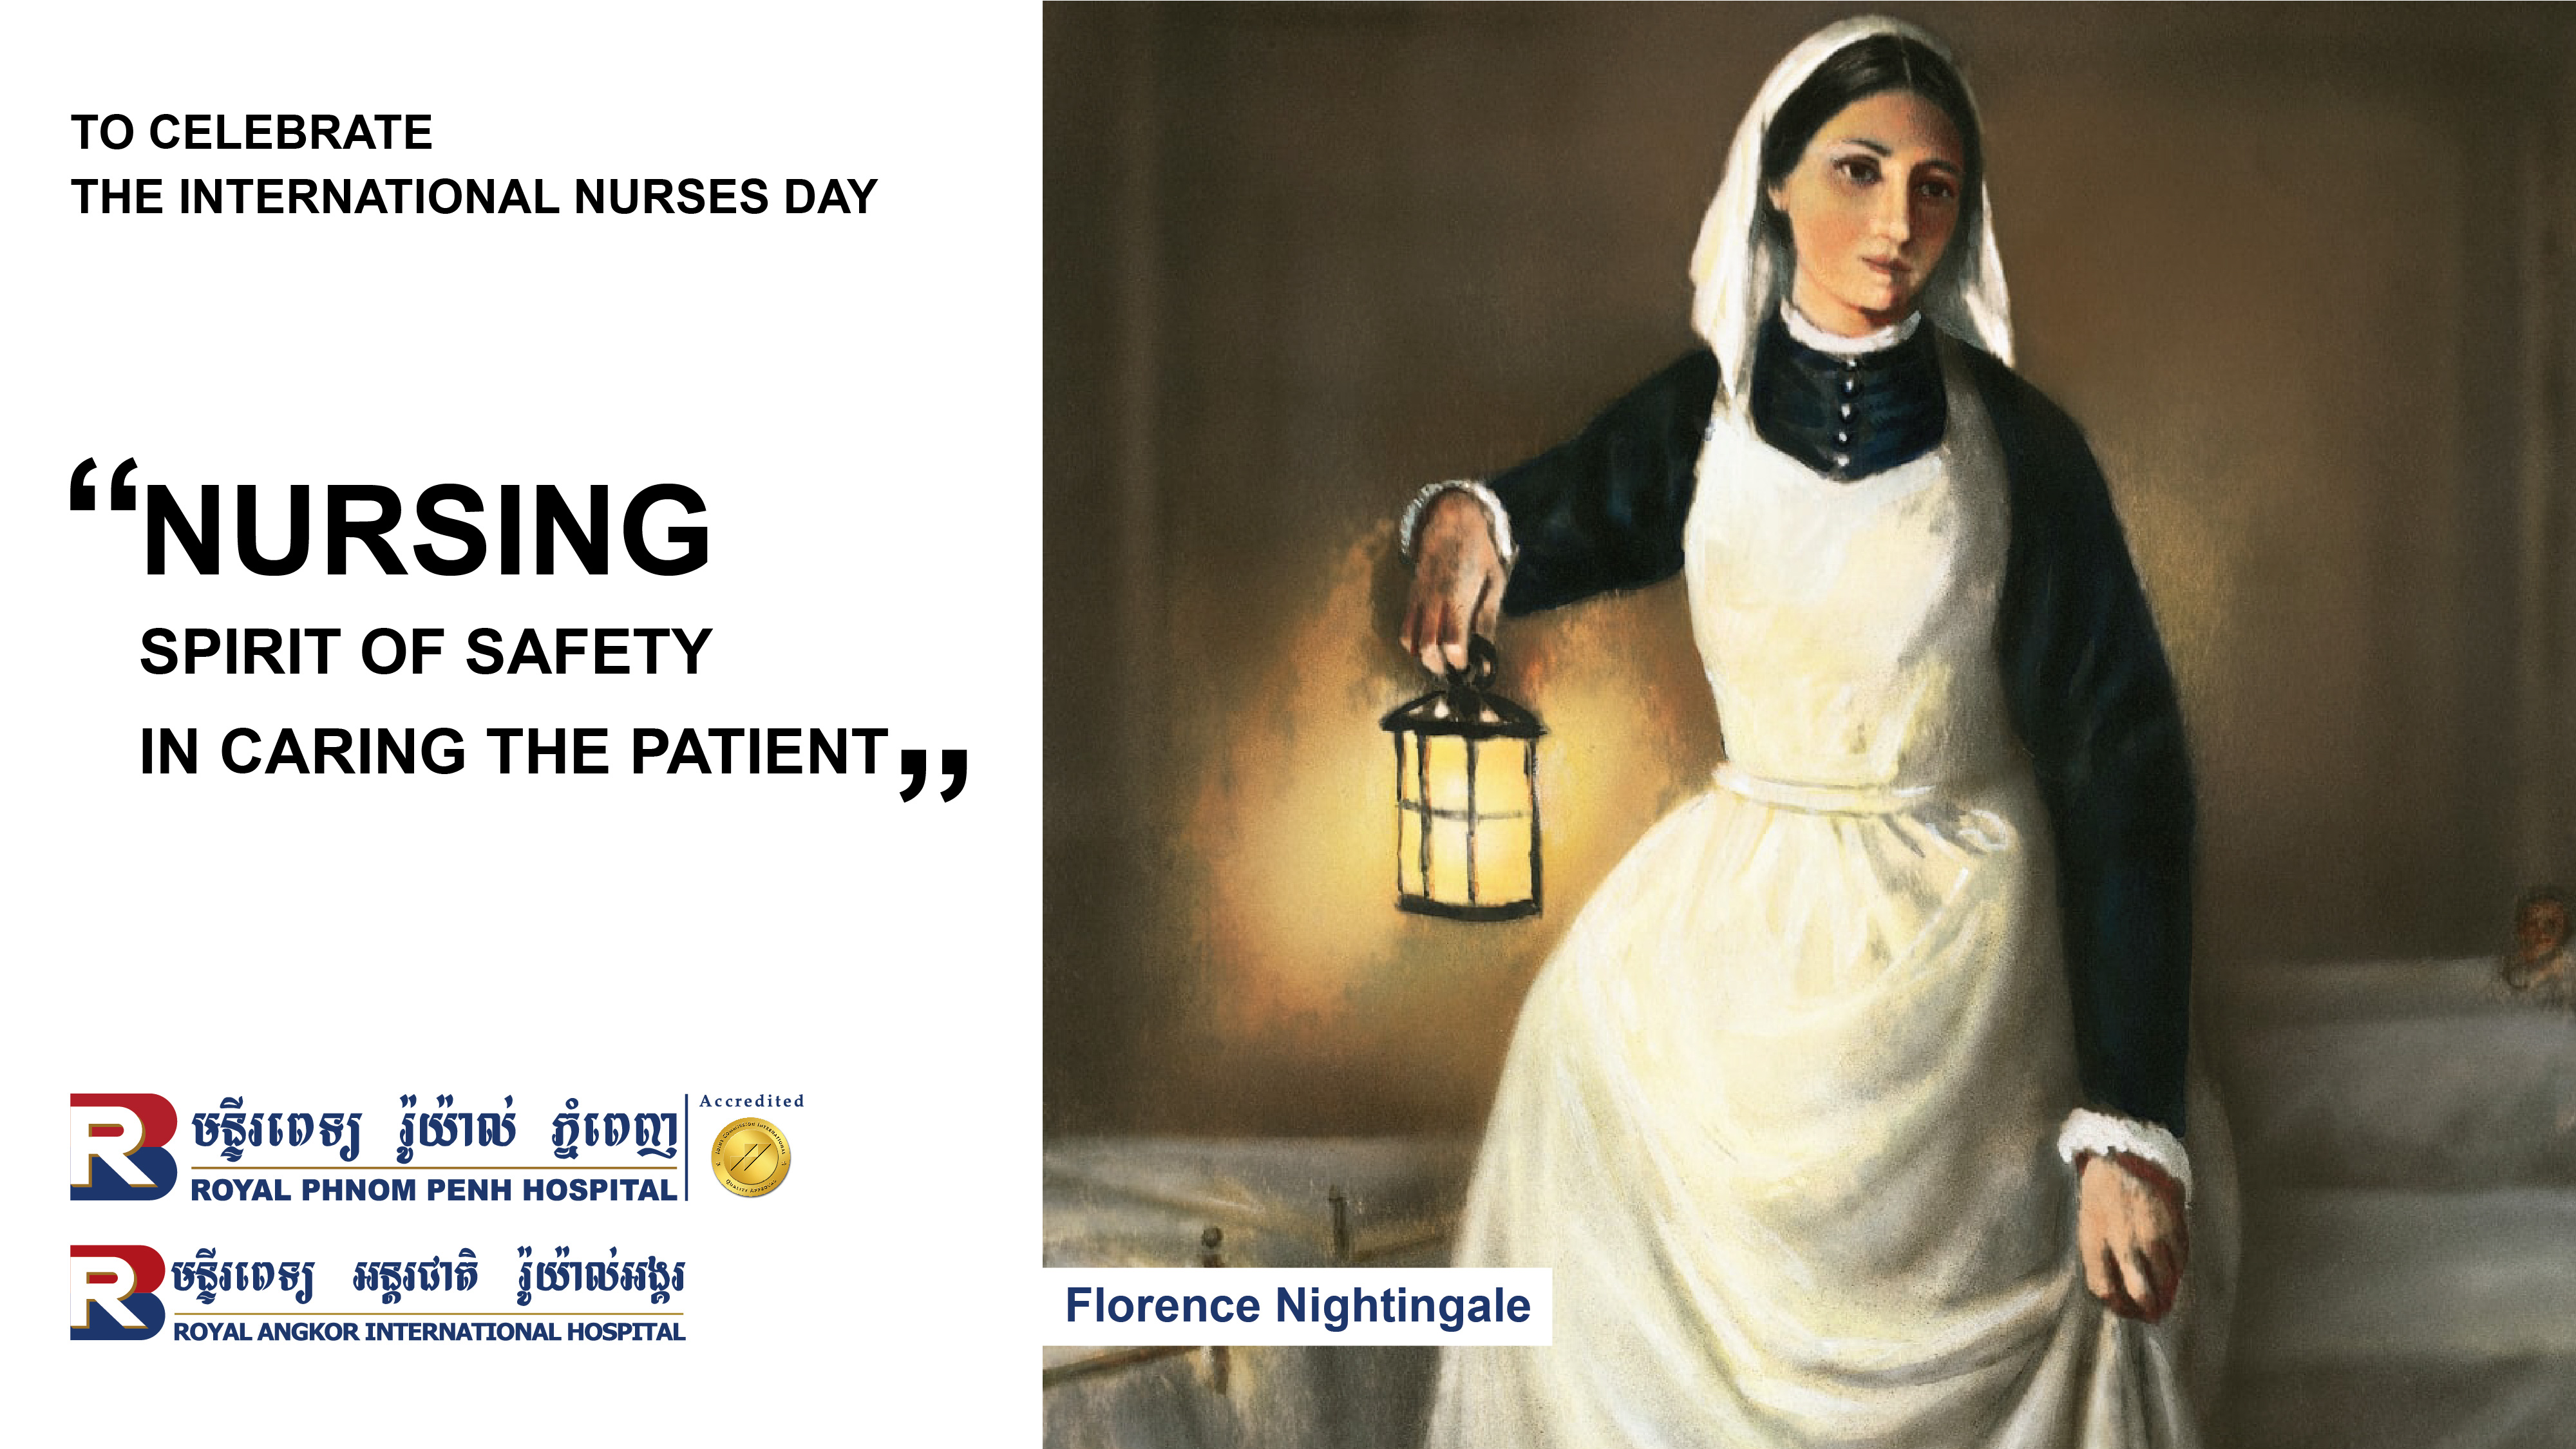 Nursing Spirit of Safety in Caring the Patient.